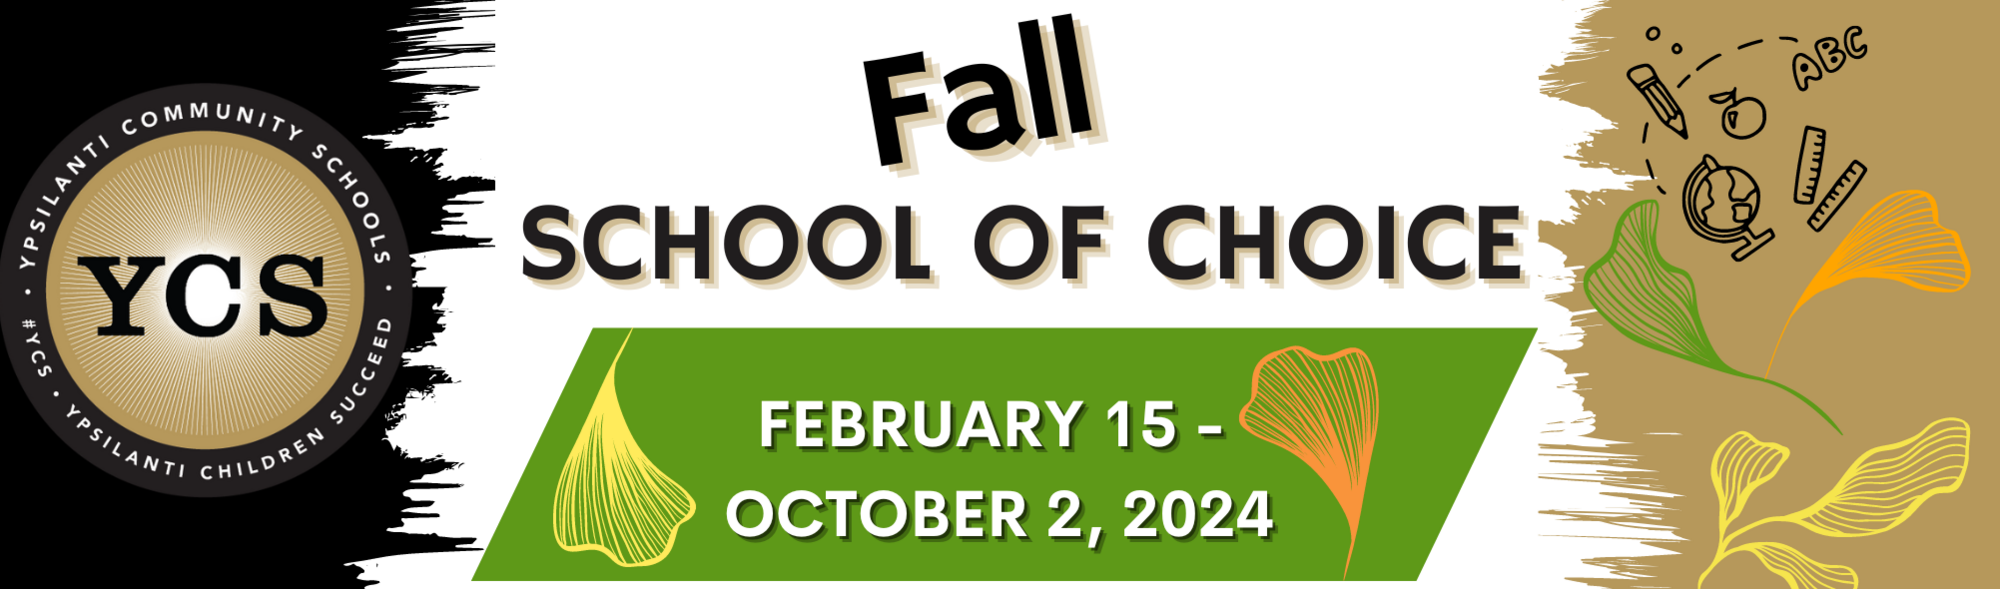 School of Choice Fall Registration Dates  February 15, 2024 - October 12, 2024